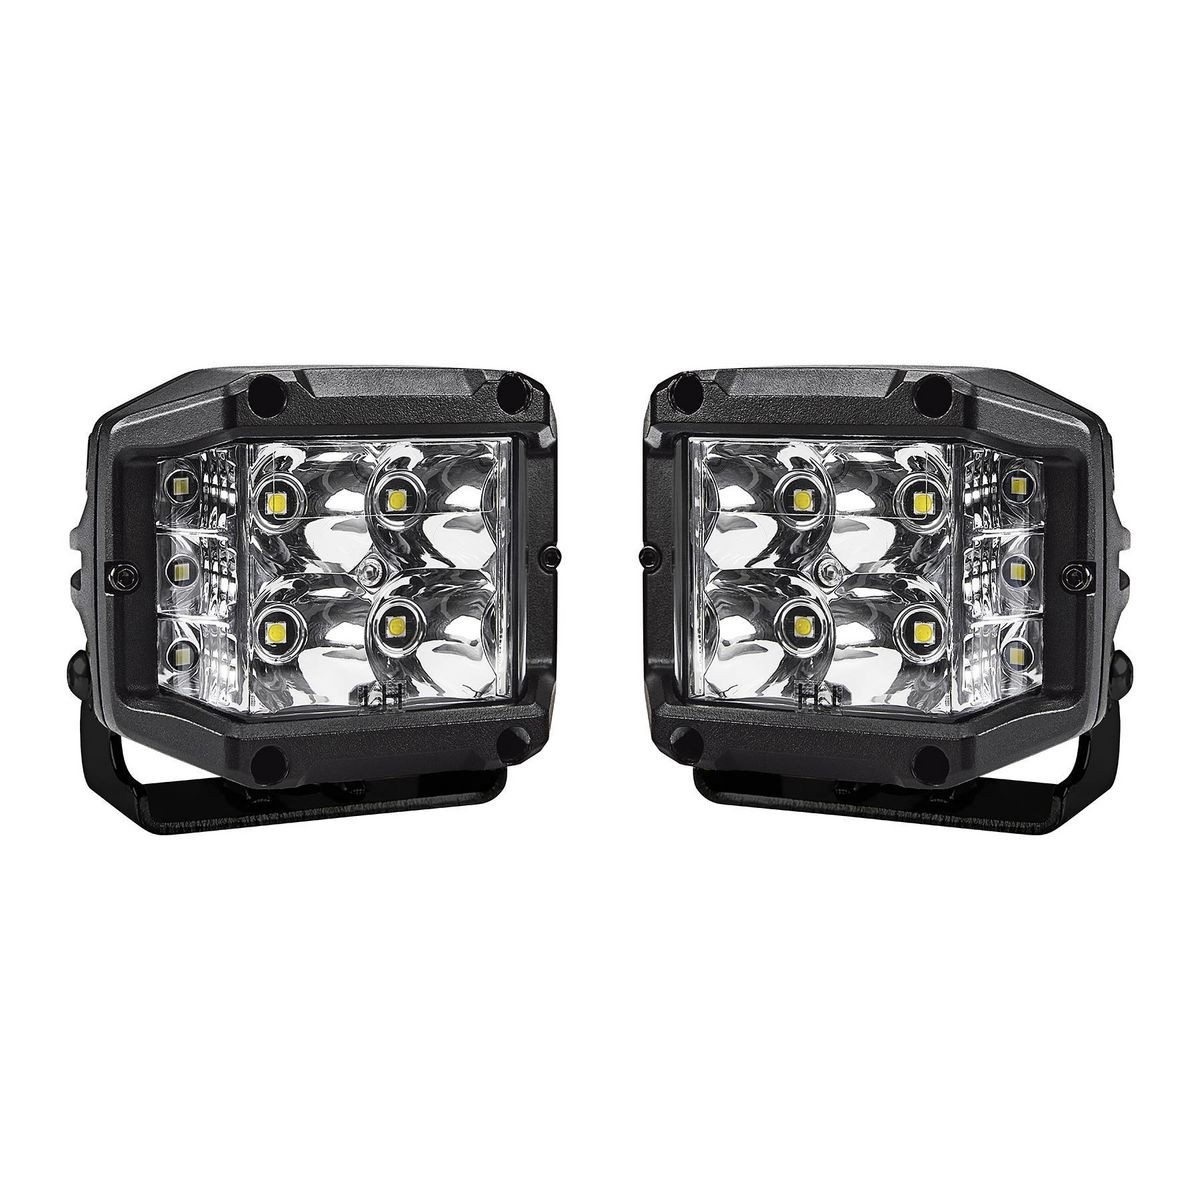 ROADSHOCK 3 In. LED Spot With Side Light – Pair – Item 57538